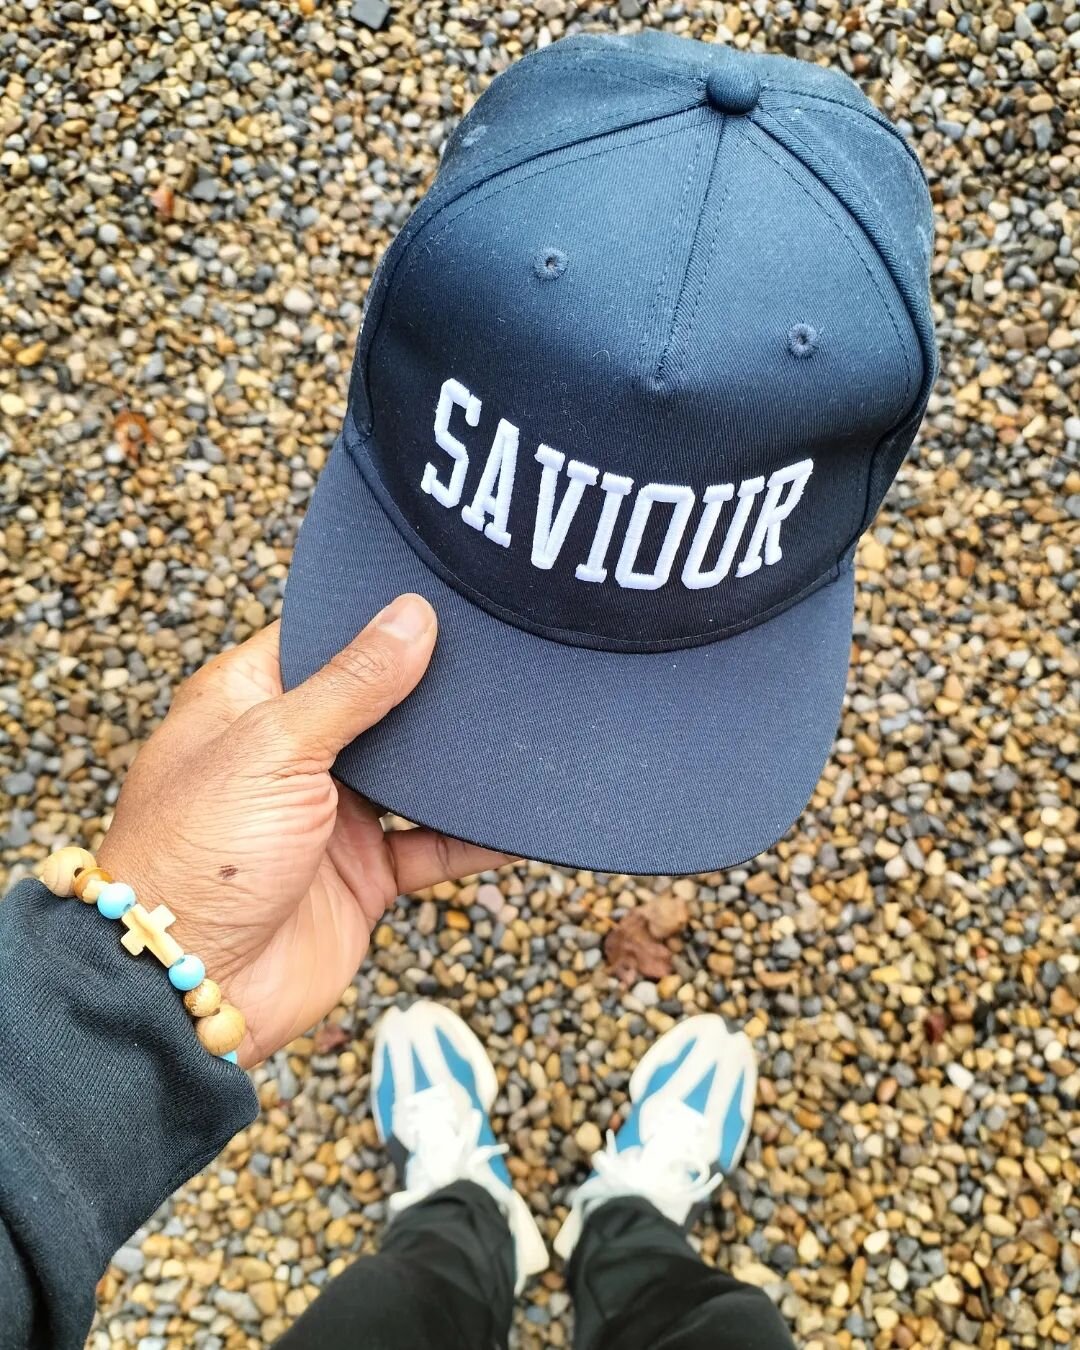 MICAH 7:7 
SAVIOUR Baseball Cap online from midnight tonight. A nice stocking filler in time for Xmas. 
#micah77 #micah #saviour #baseballcap #cap #christianlifestyle #christianapparel #christianaccessories #weartheword #godmademedoit #blessed